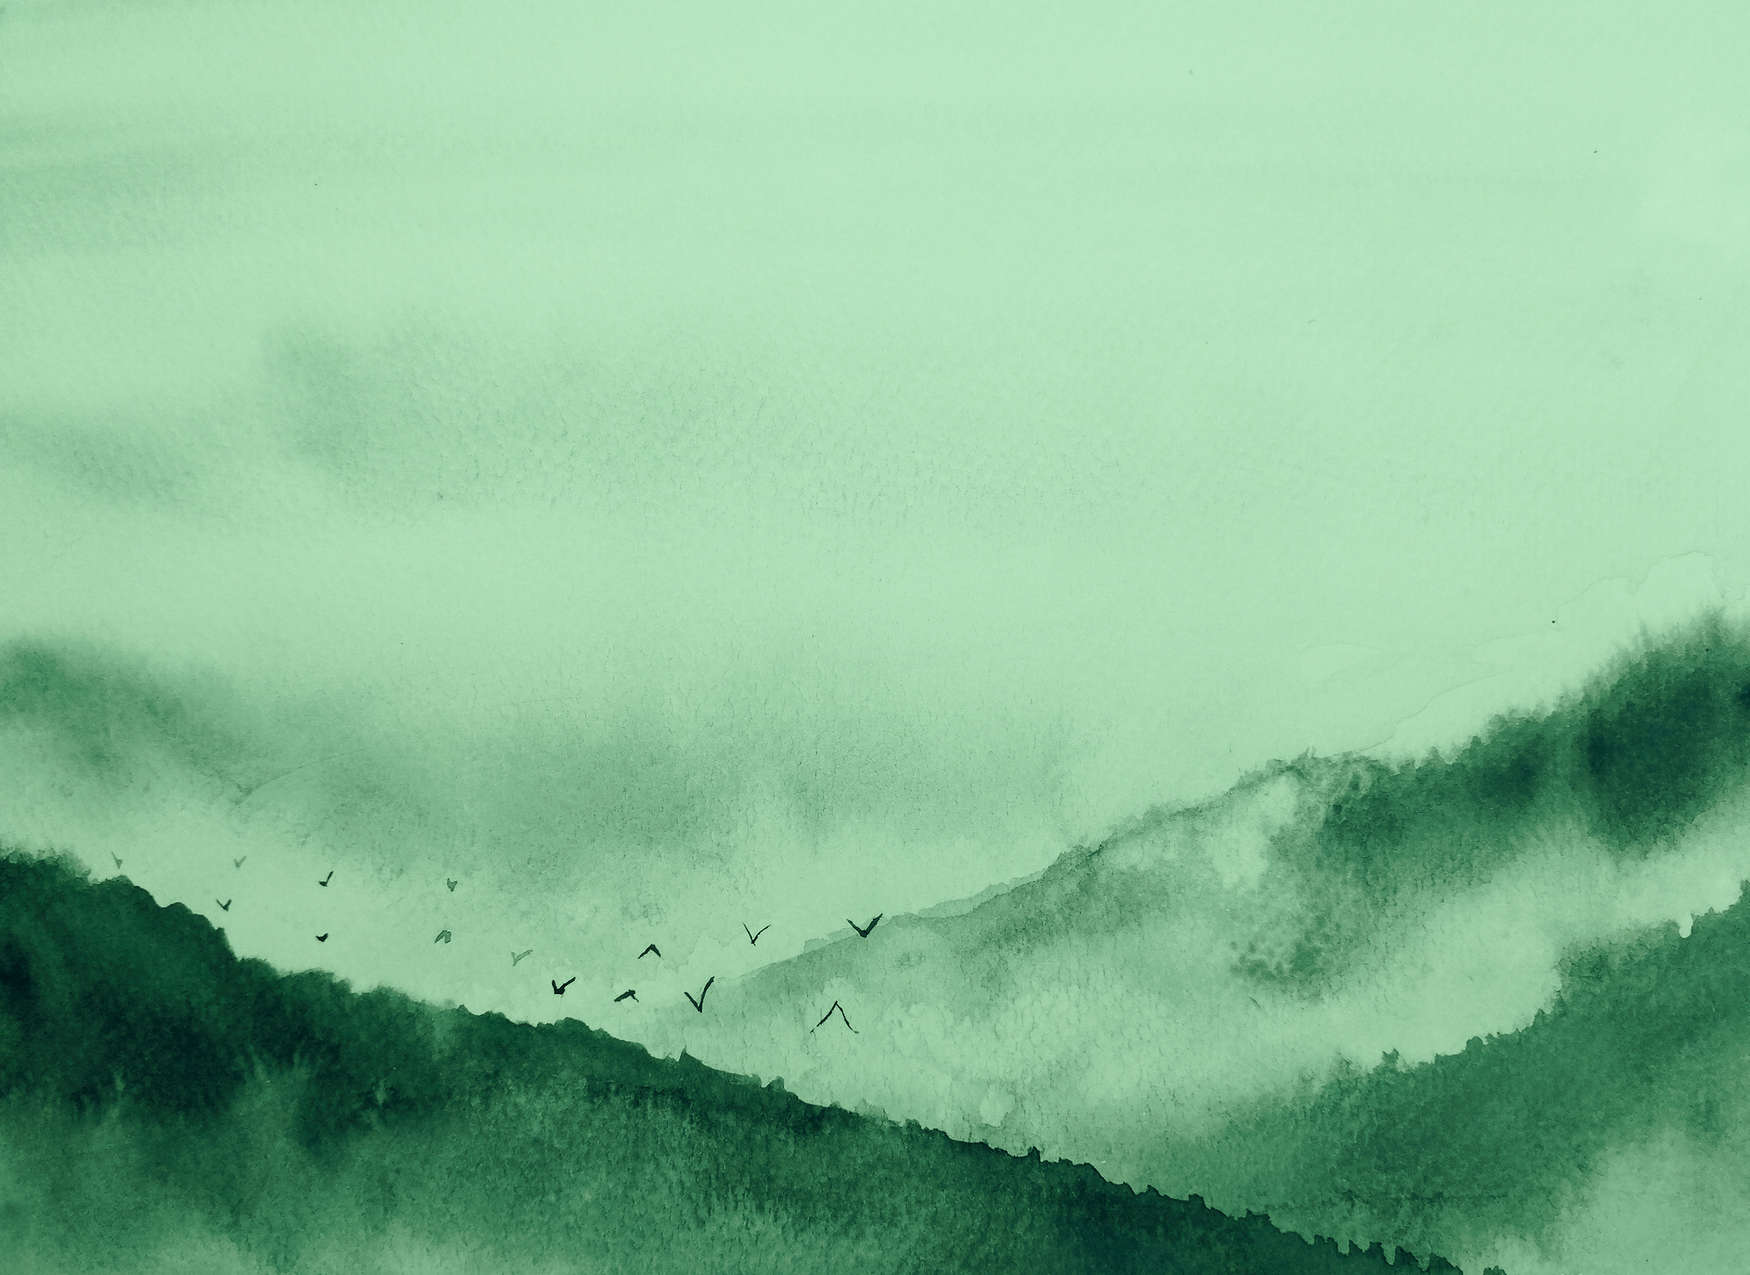             Foggy landscape in painting style - green, black
        